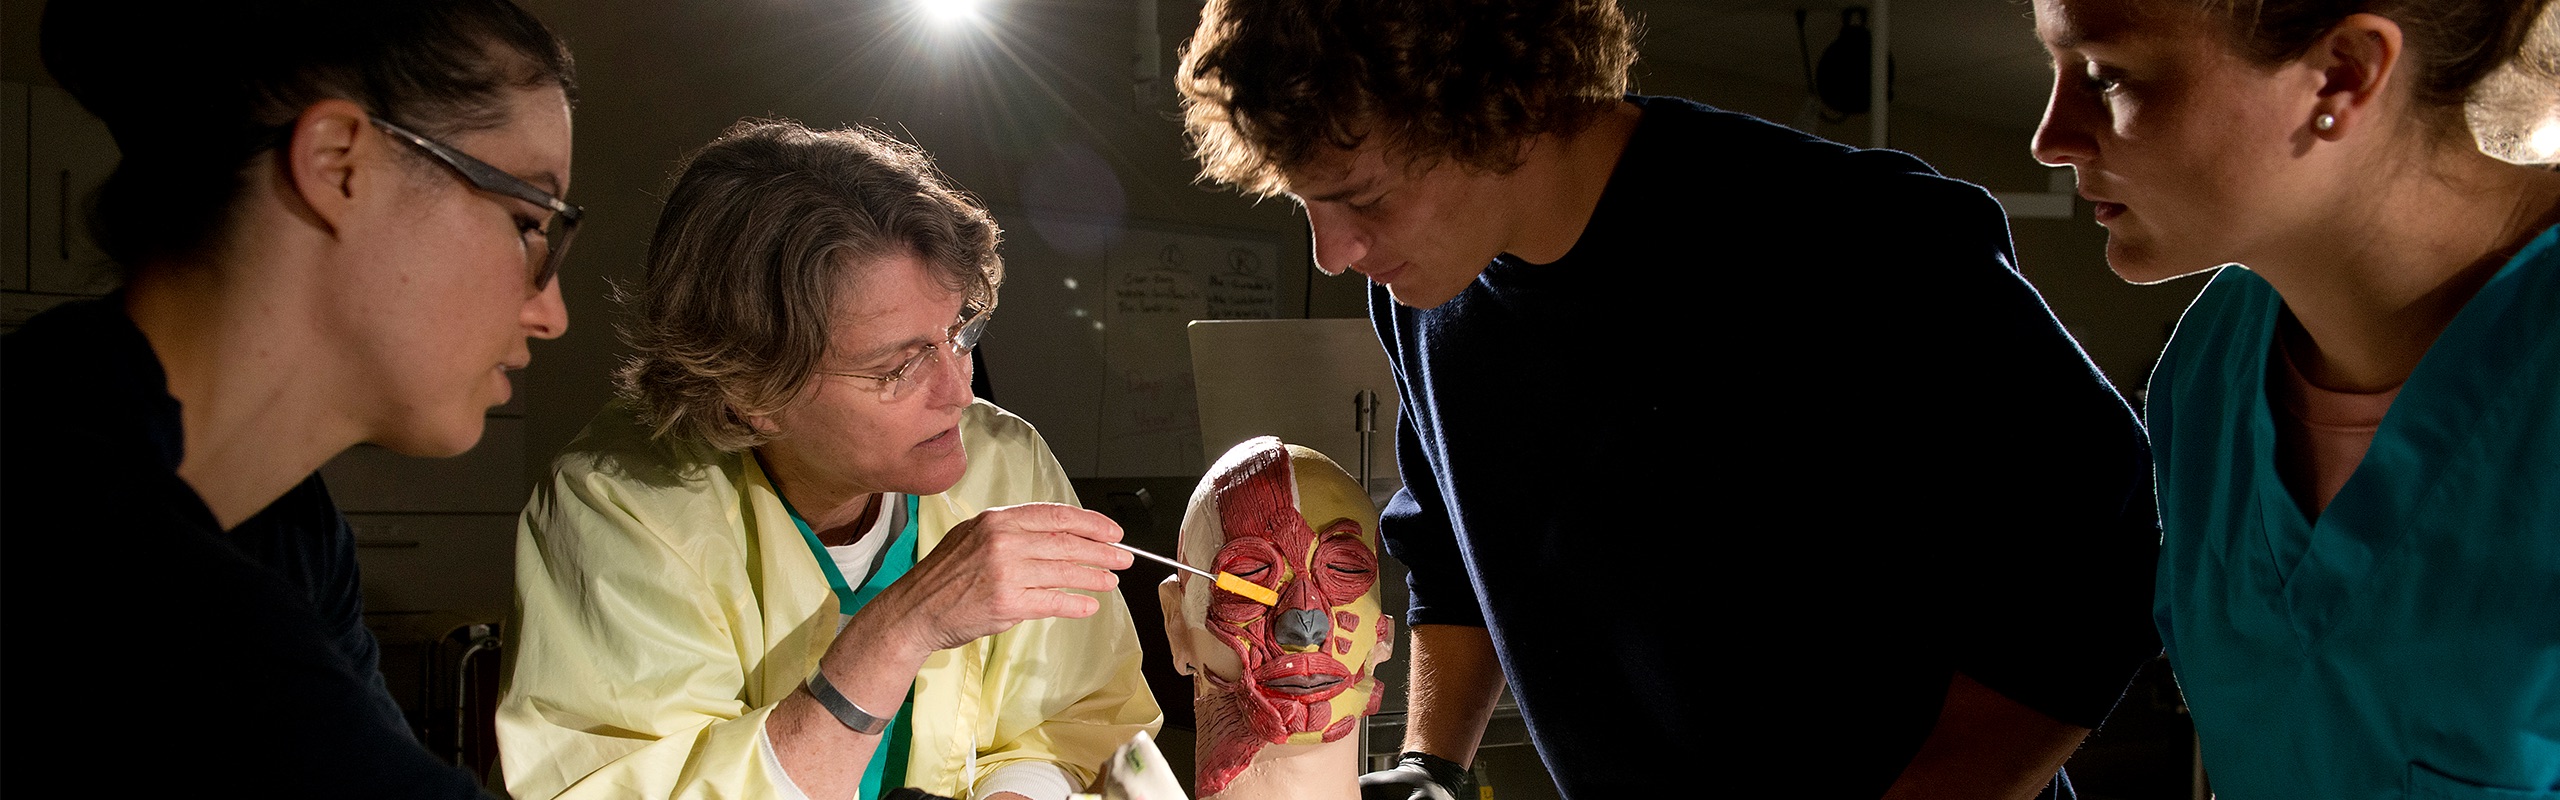 Assistant Professor of Physical Therapy Education Janet Cope works with D.P.T. students in an anatomy lab class.